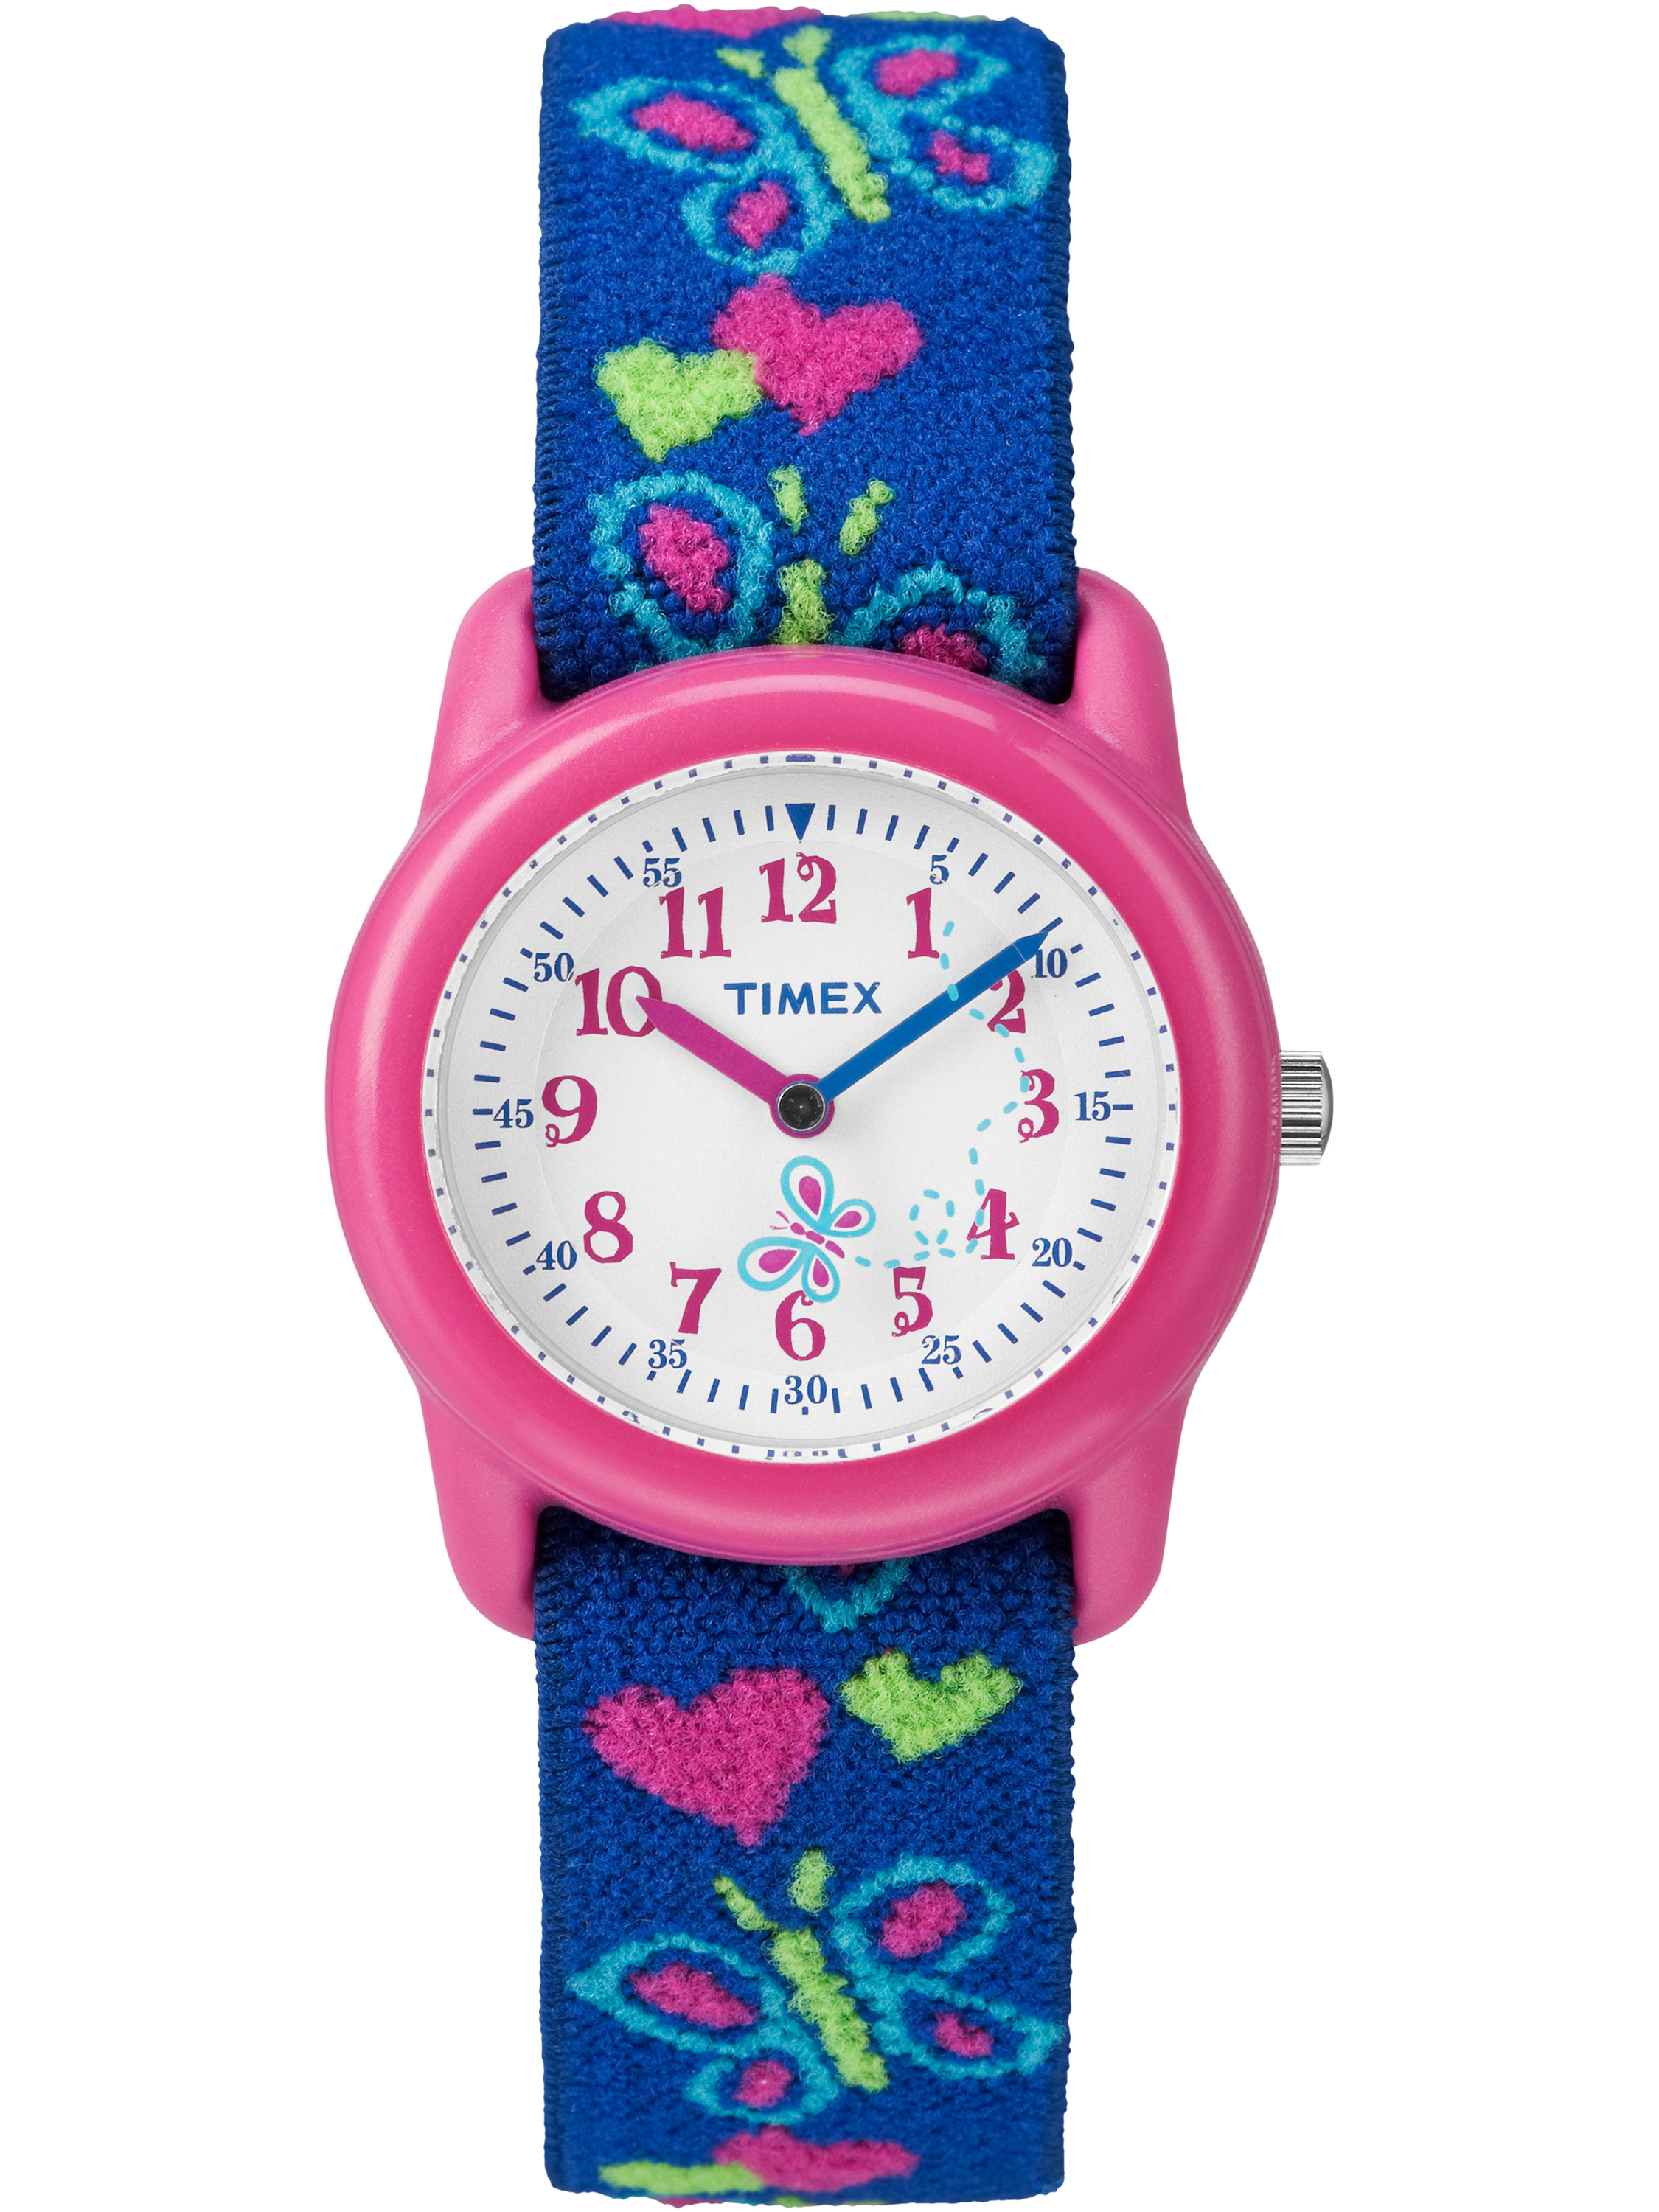 TIMEX TIME MACHINES® 29mm Butterflies and Hearts Elastic Fabric Kids Watch - image 1 of 3